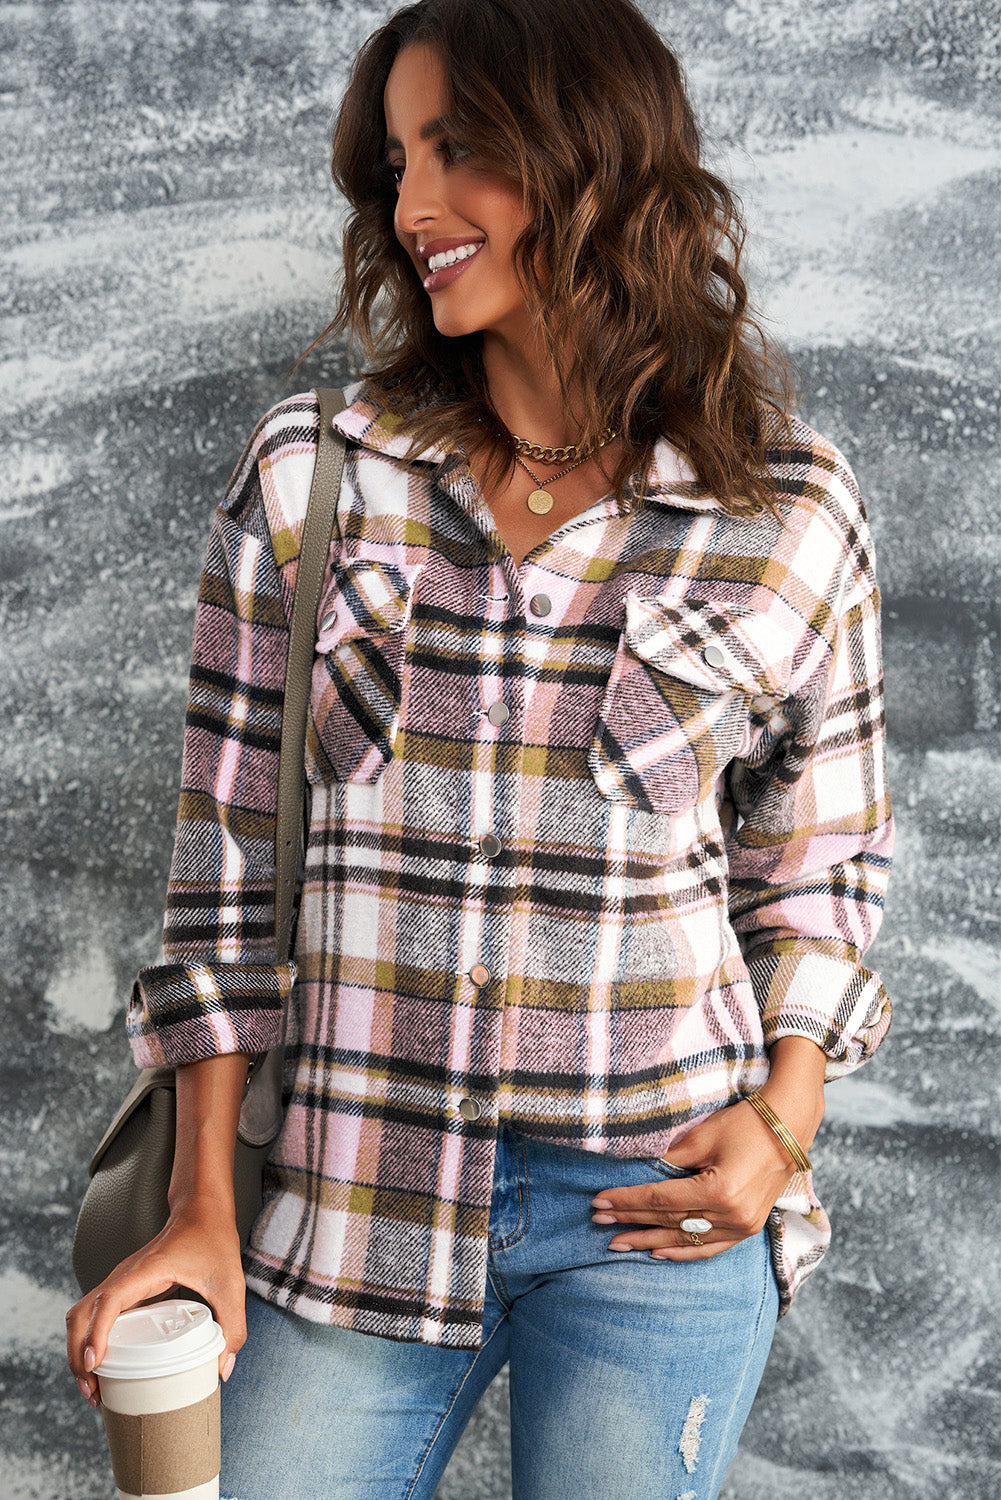 Plaid Button Front Shirt Jacket with Breast Pockets - Online Only *